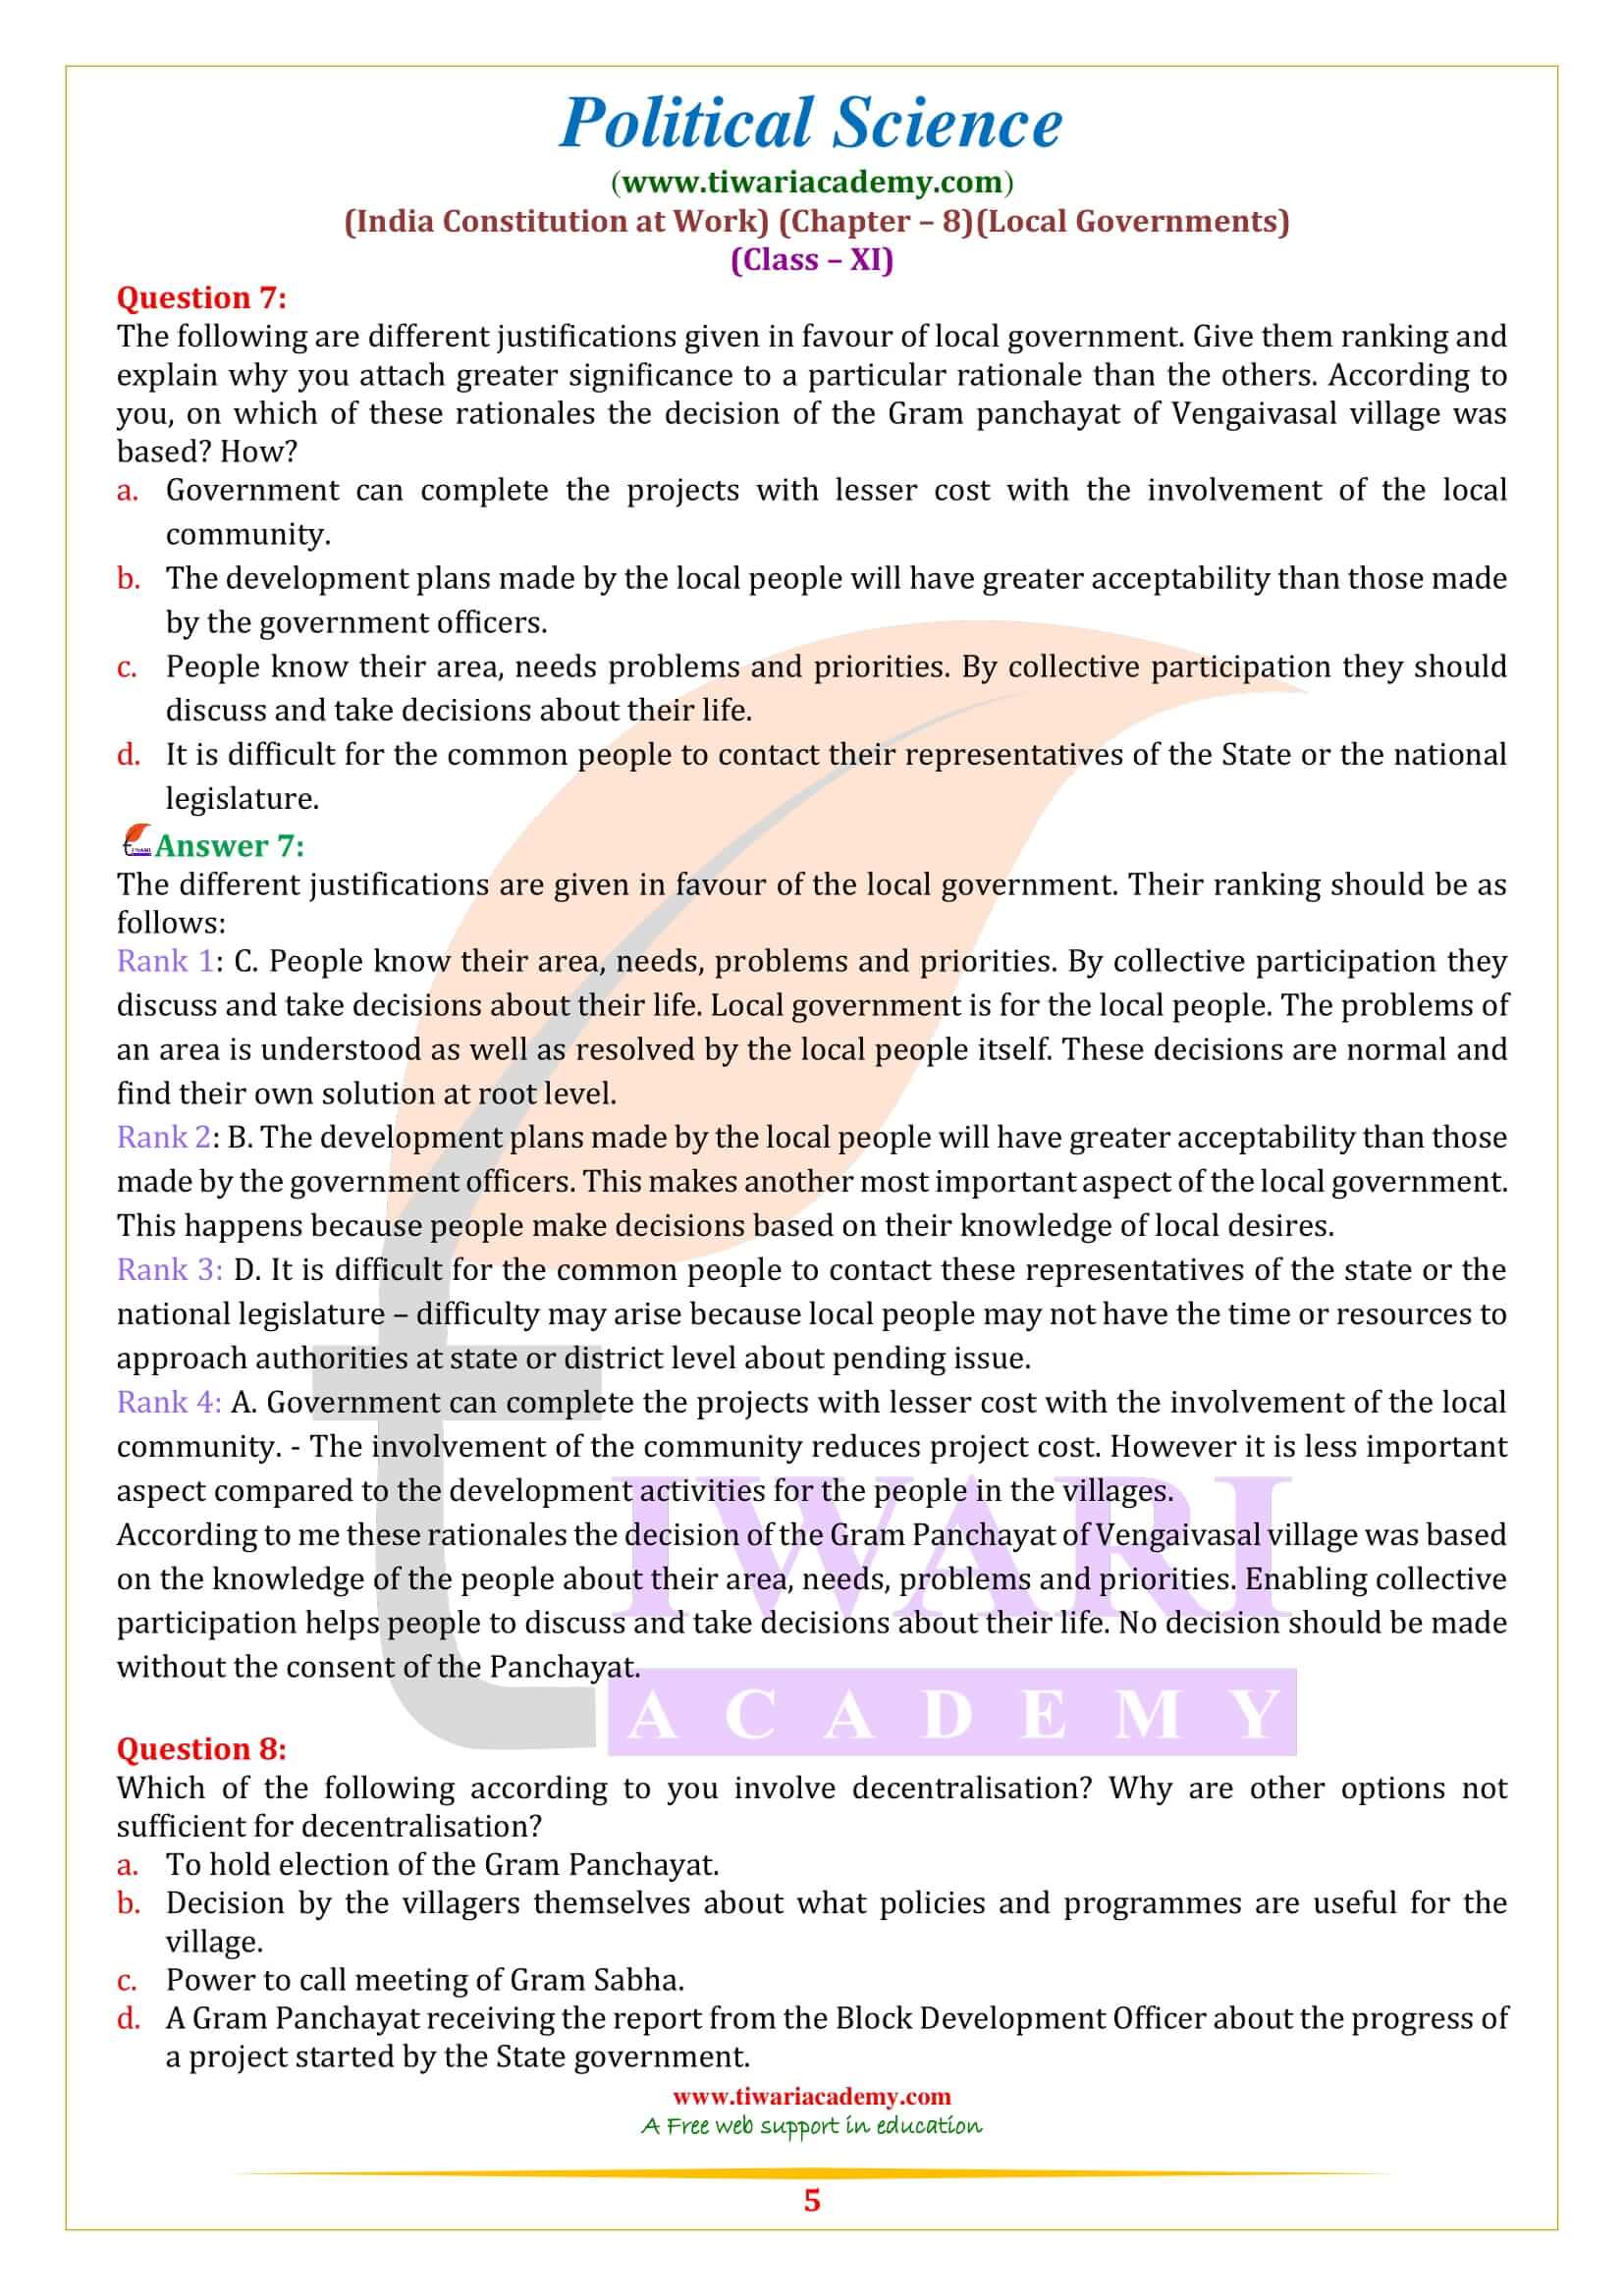 NCERT Solutions for Class 11 Political Science Chapter 8 in English Medium